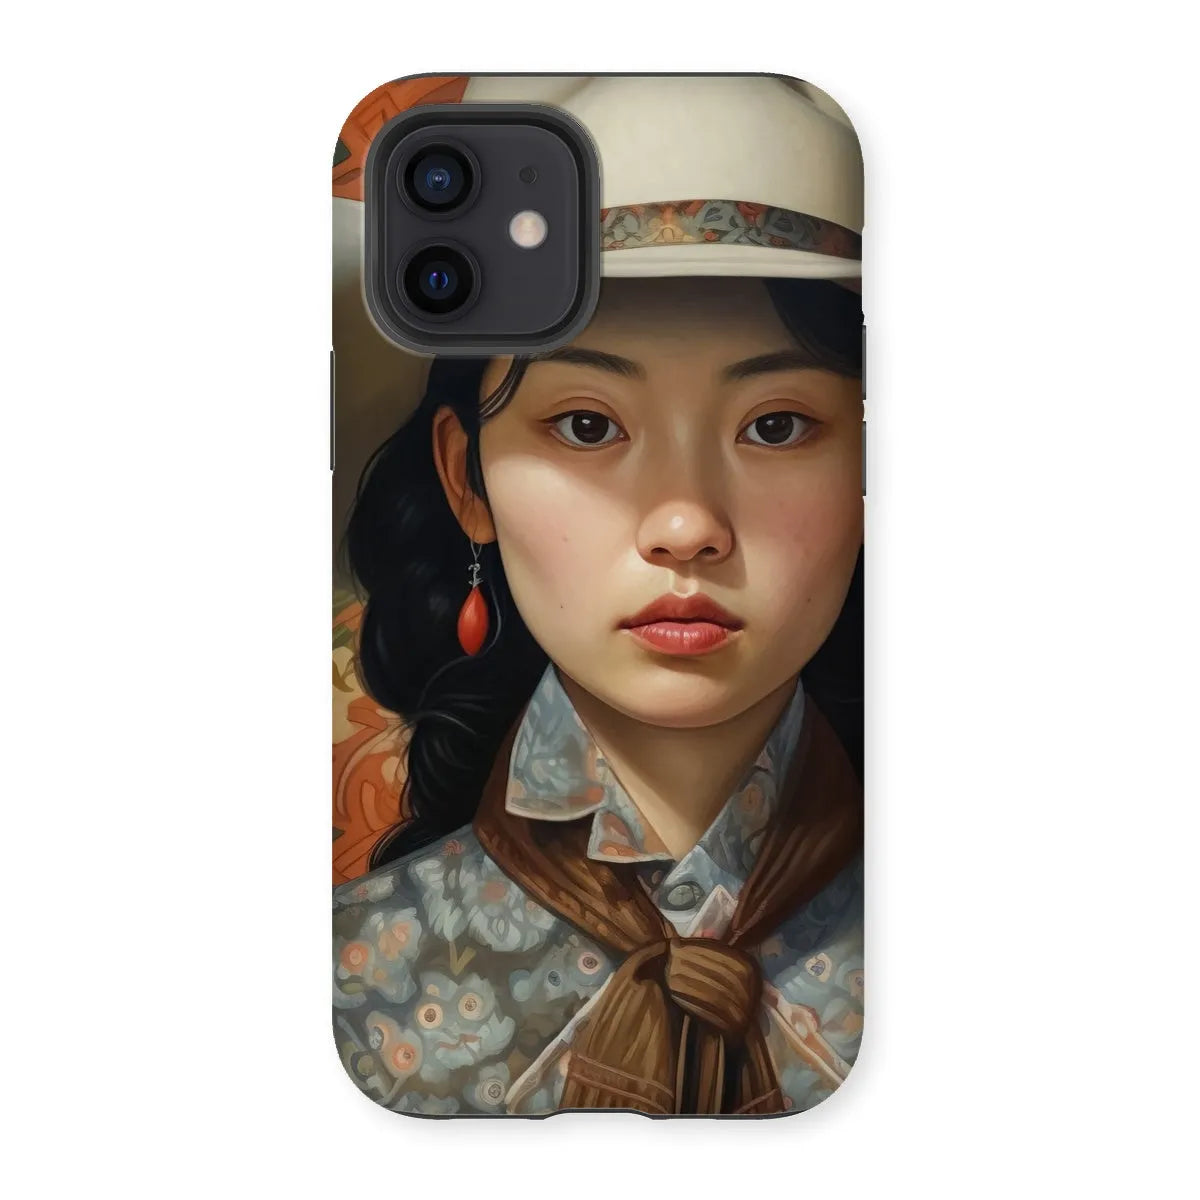 Zhi The Lesbian Cowgirl - Sapphic Art Phone Case - Iphone 12 / Matte - Mobile Phone Cases - Aesthetic Art